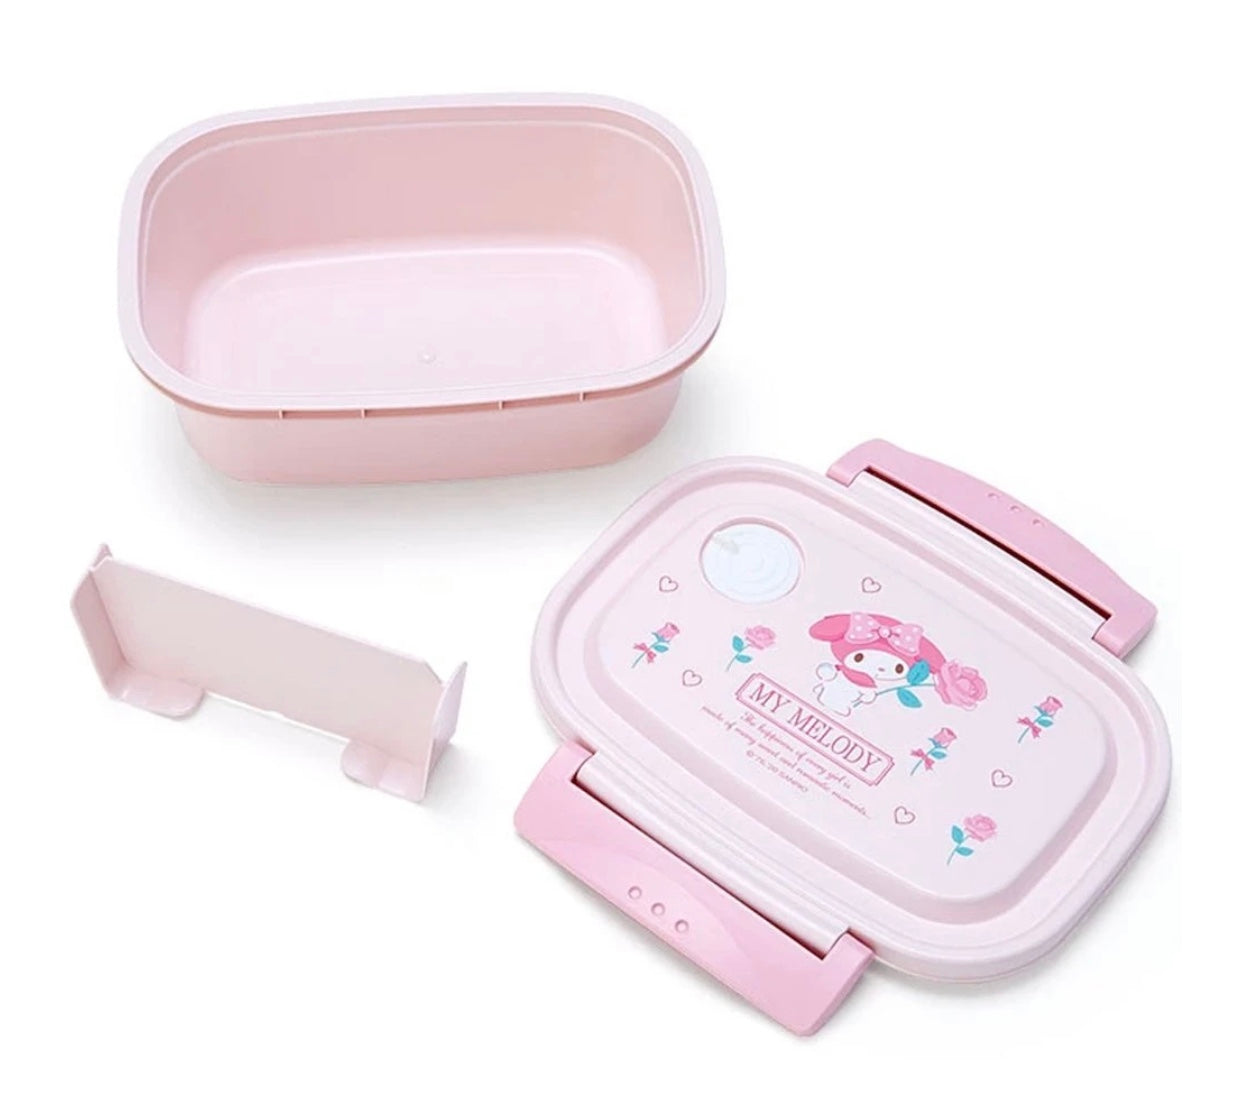 Buy Sanrio Kuromi Lace Bento with Two Clips at ARTBOX